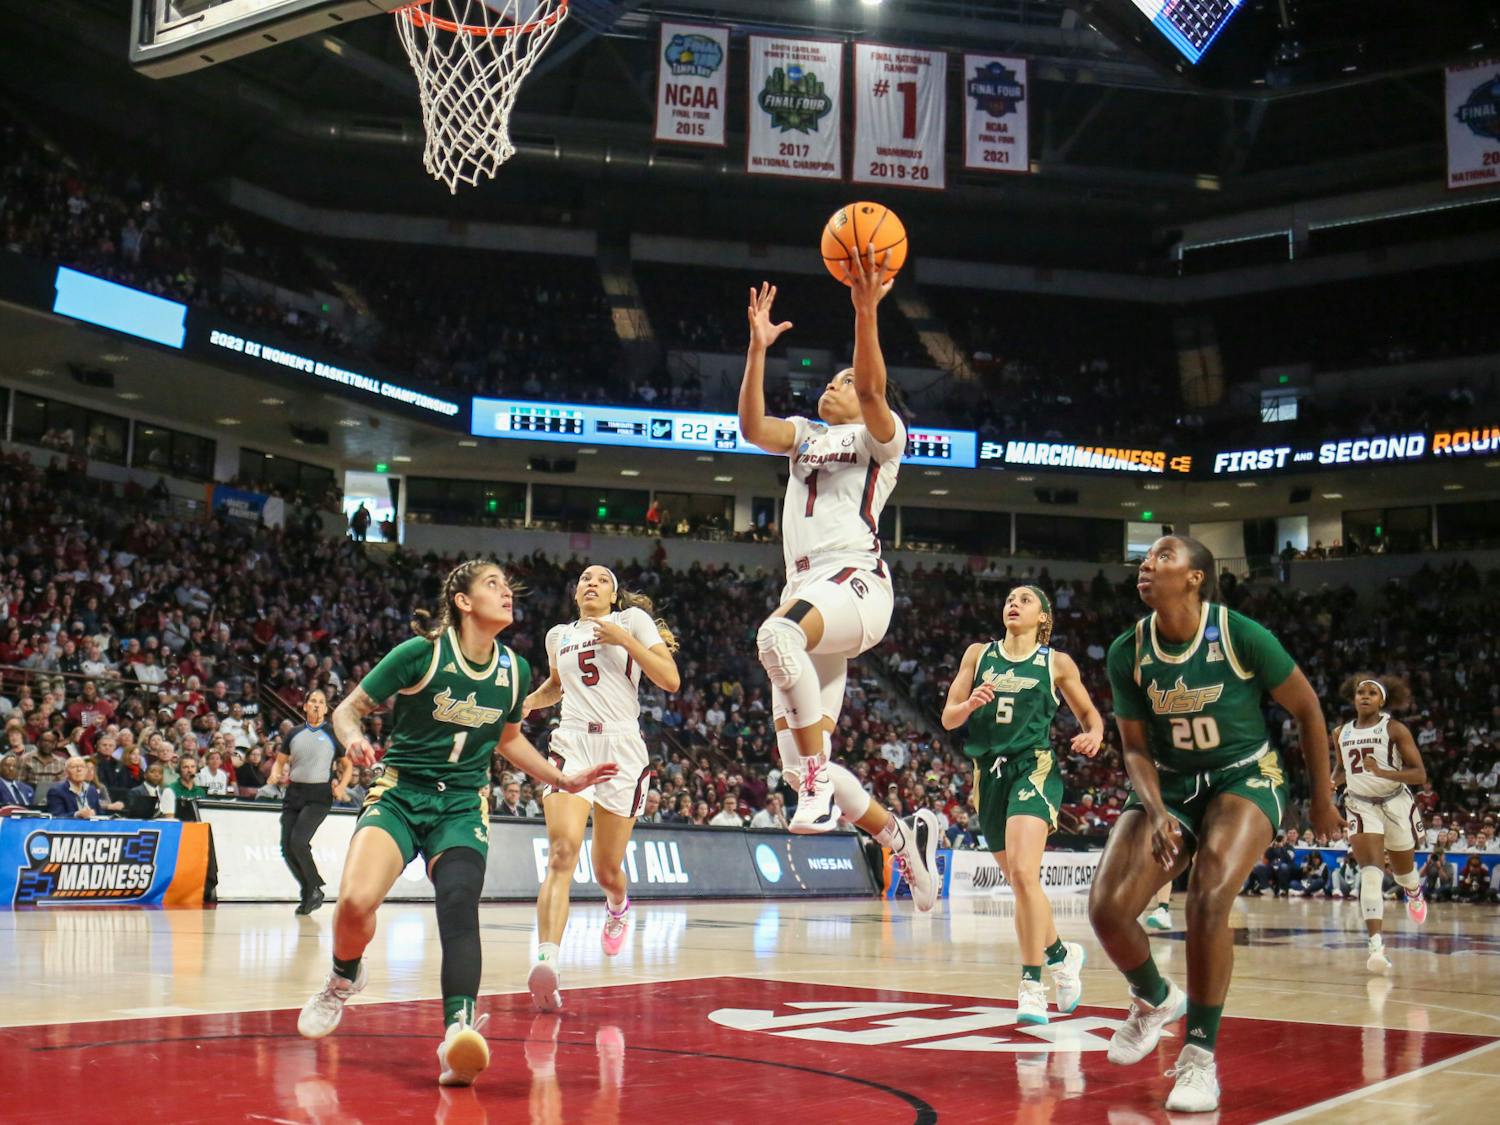 Senior guard Zia Cooke lays up the ball during South Carolina’s game against South Florida in round two of the NCAA tournament at Colonial Life Arena on March 19, 2023. The Gamecocks defeated the Bulls 76-45.